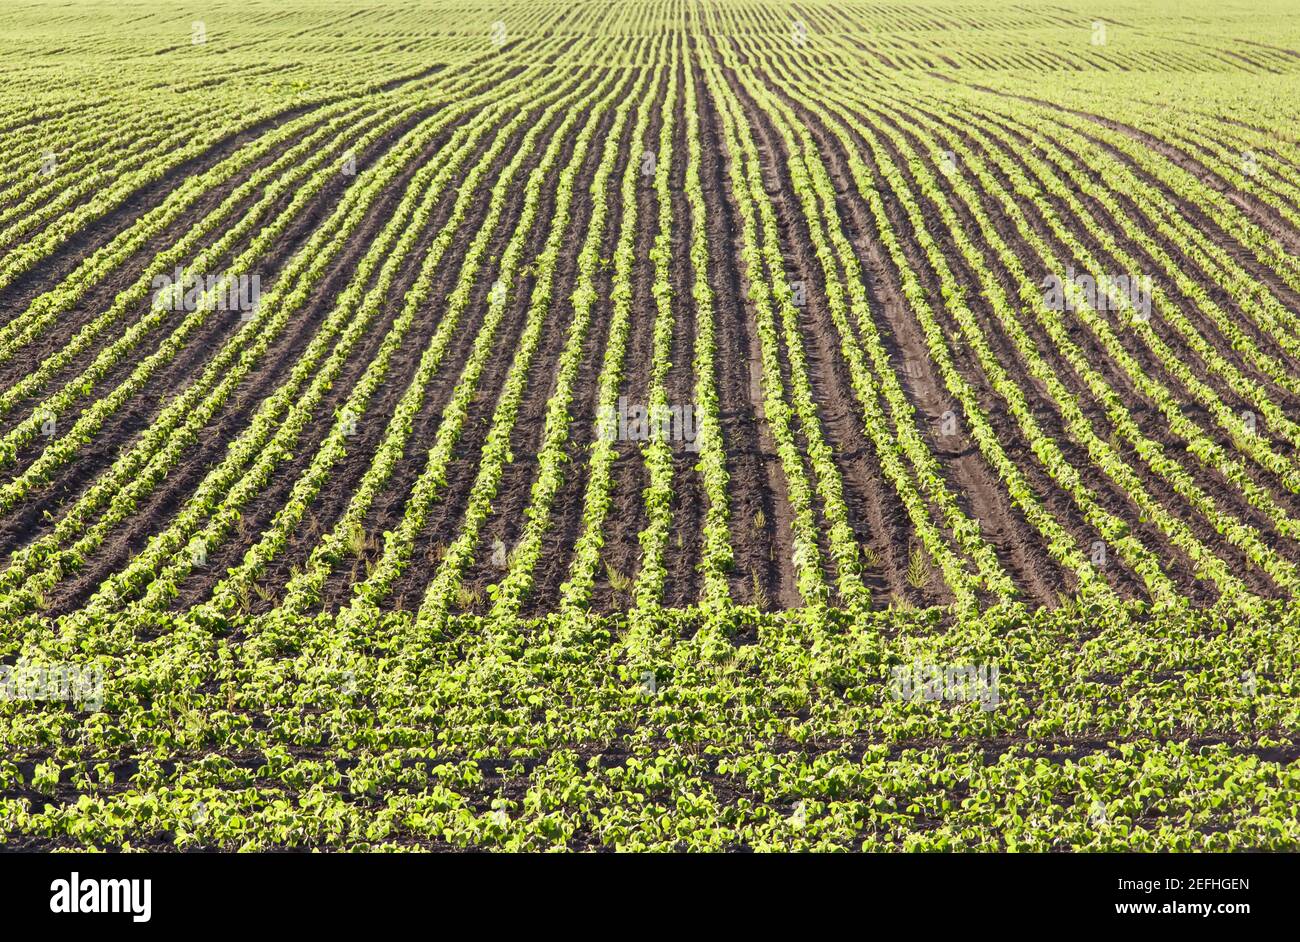 Rows of early soy shoots growing in the rich dark brown soil. Stock Photo